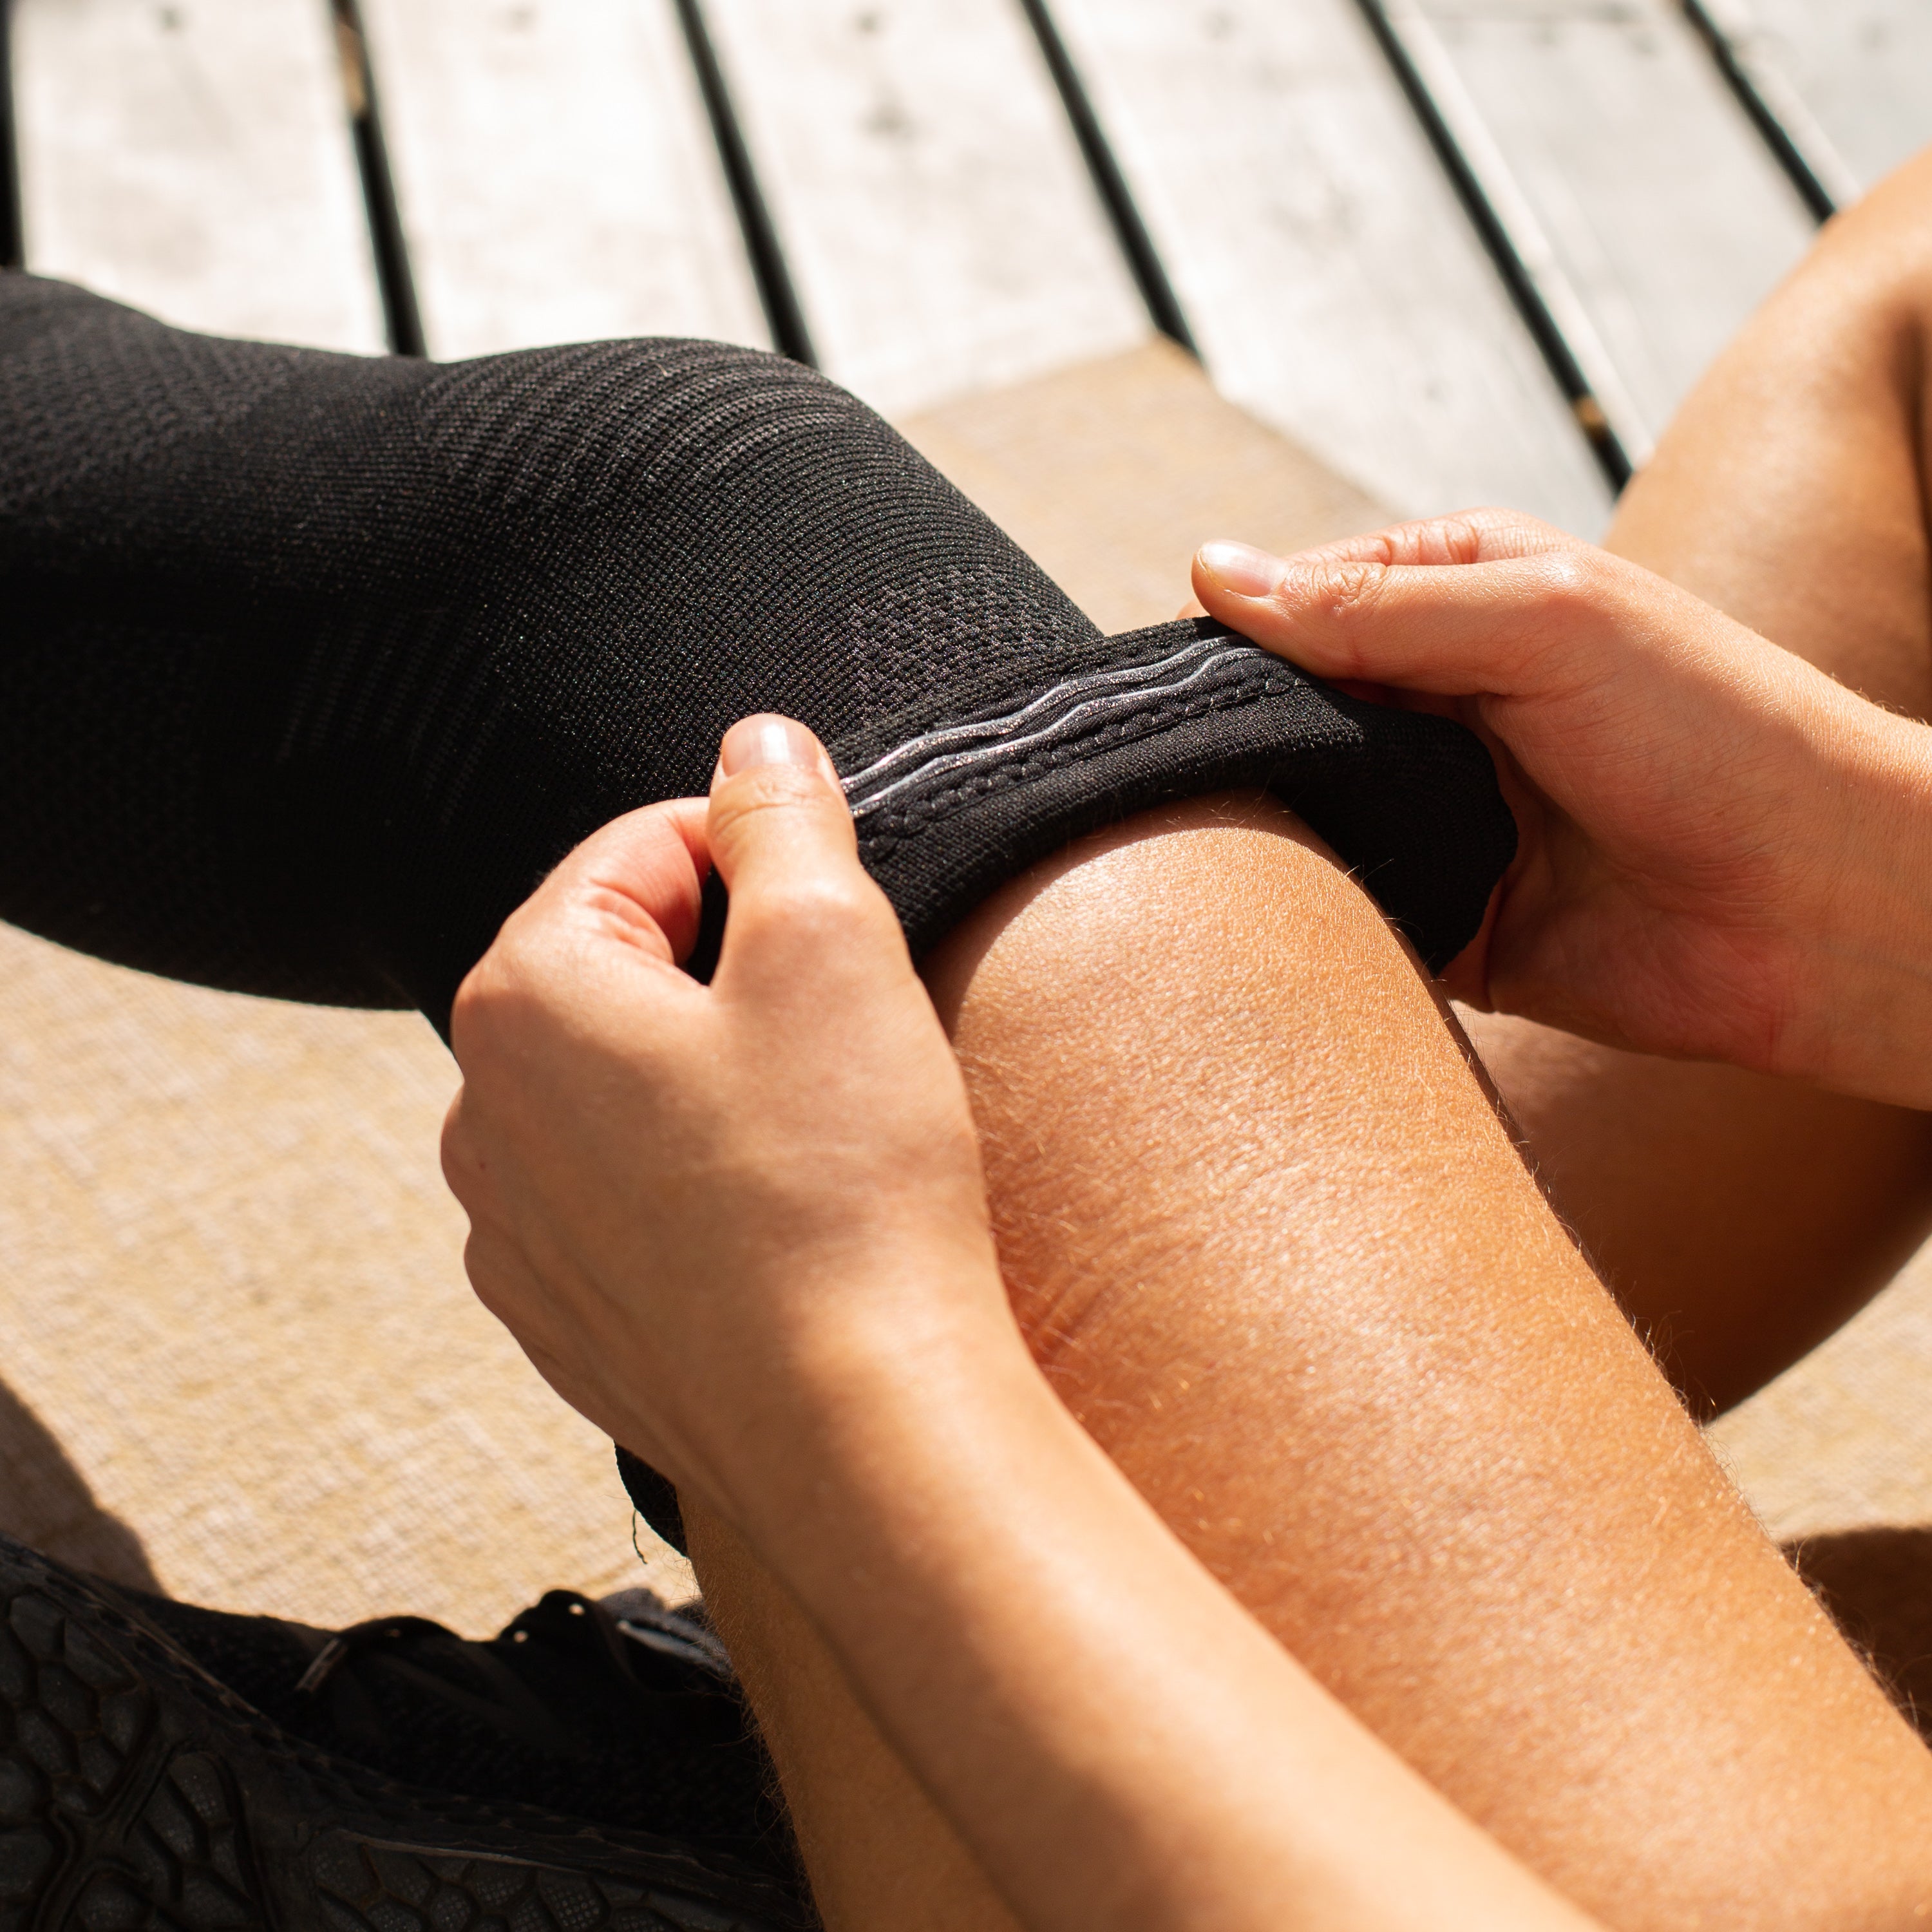 Putting Compression Sleeve on the knee